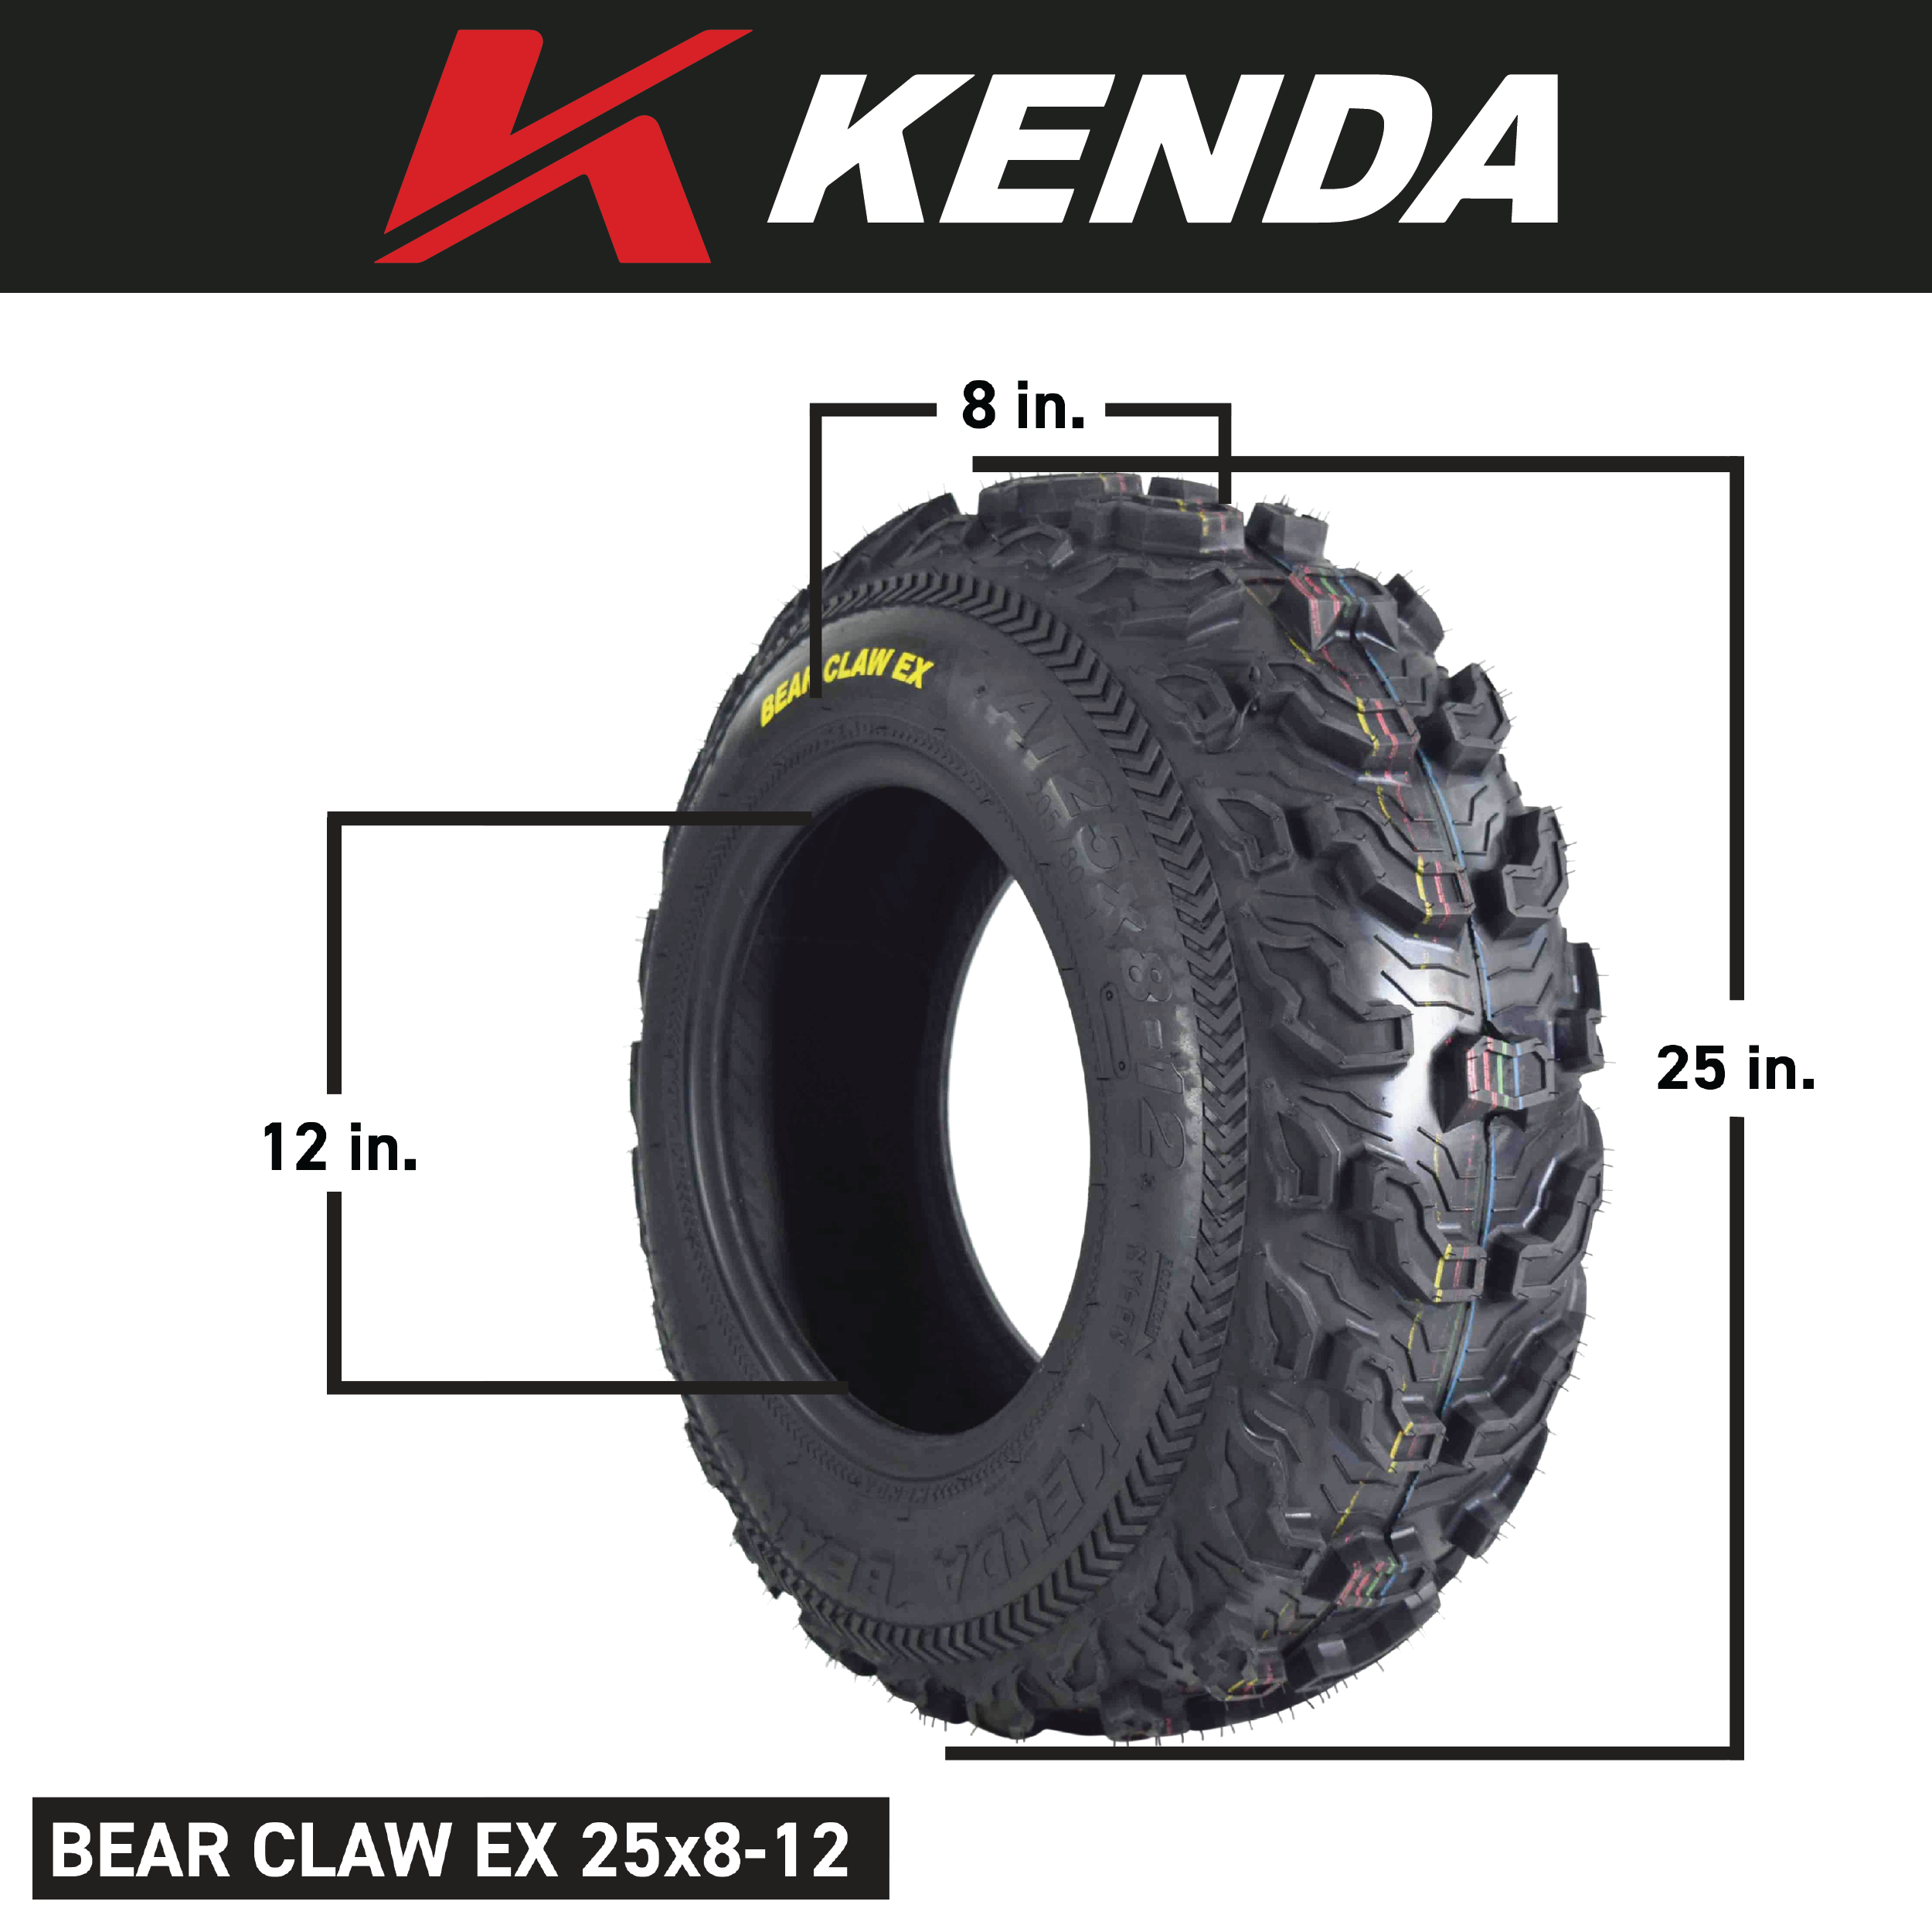 Kenda Bear Claw EX 25x8-12 Front 6 PLY ATV Tires Bearclaw 25x8x12 (2 Pack)